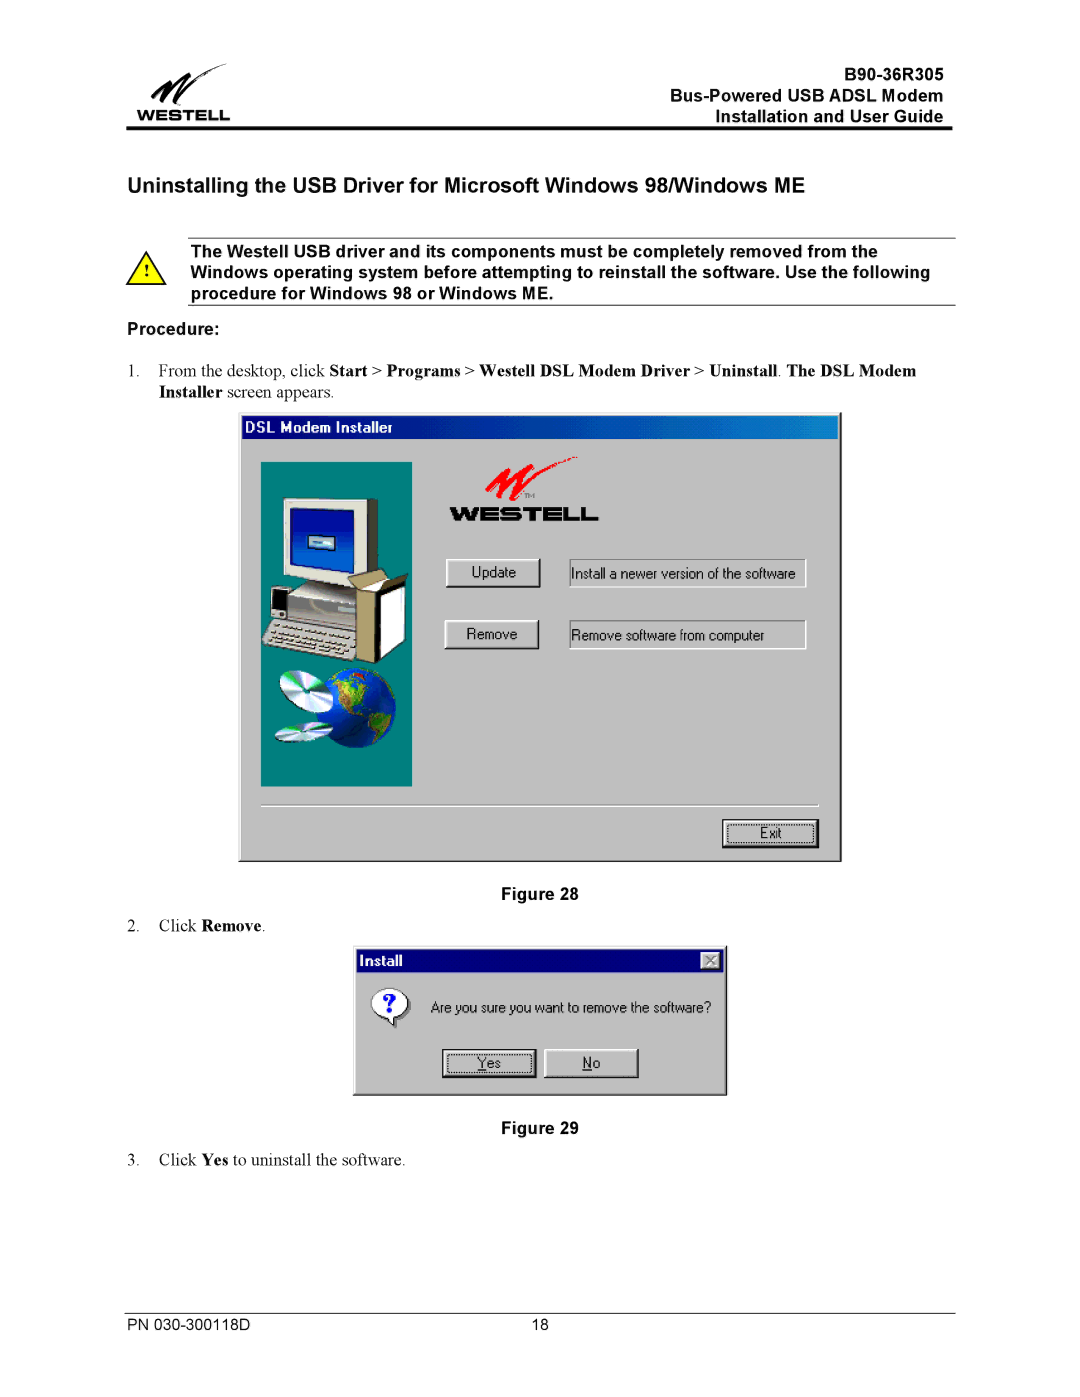 Westell Technologies B90-36R305 manual Click Remove Click Yes to uninstall the software 